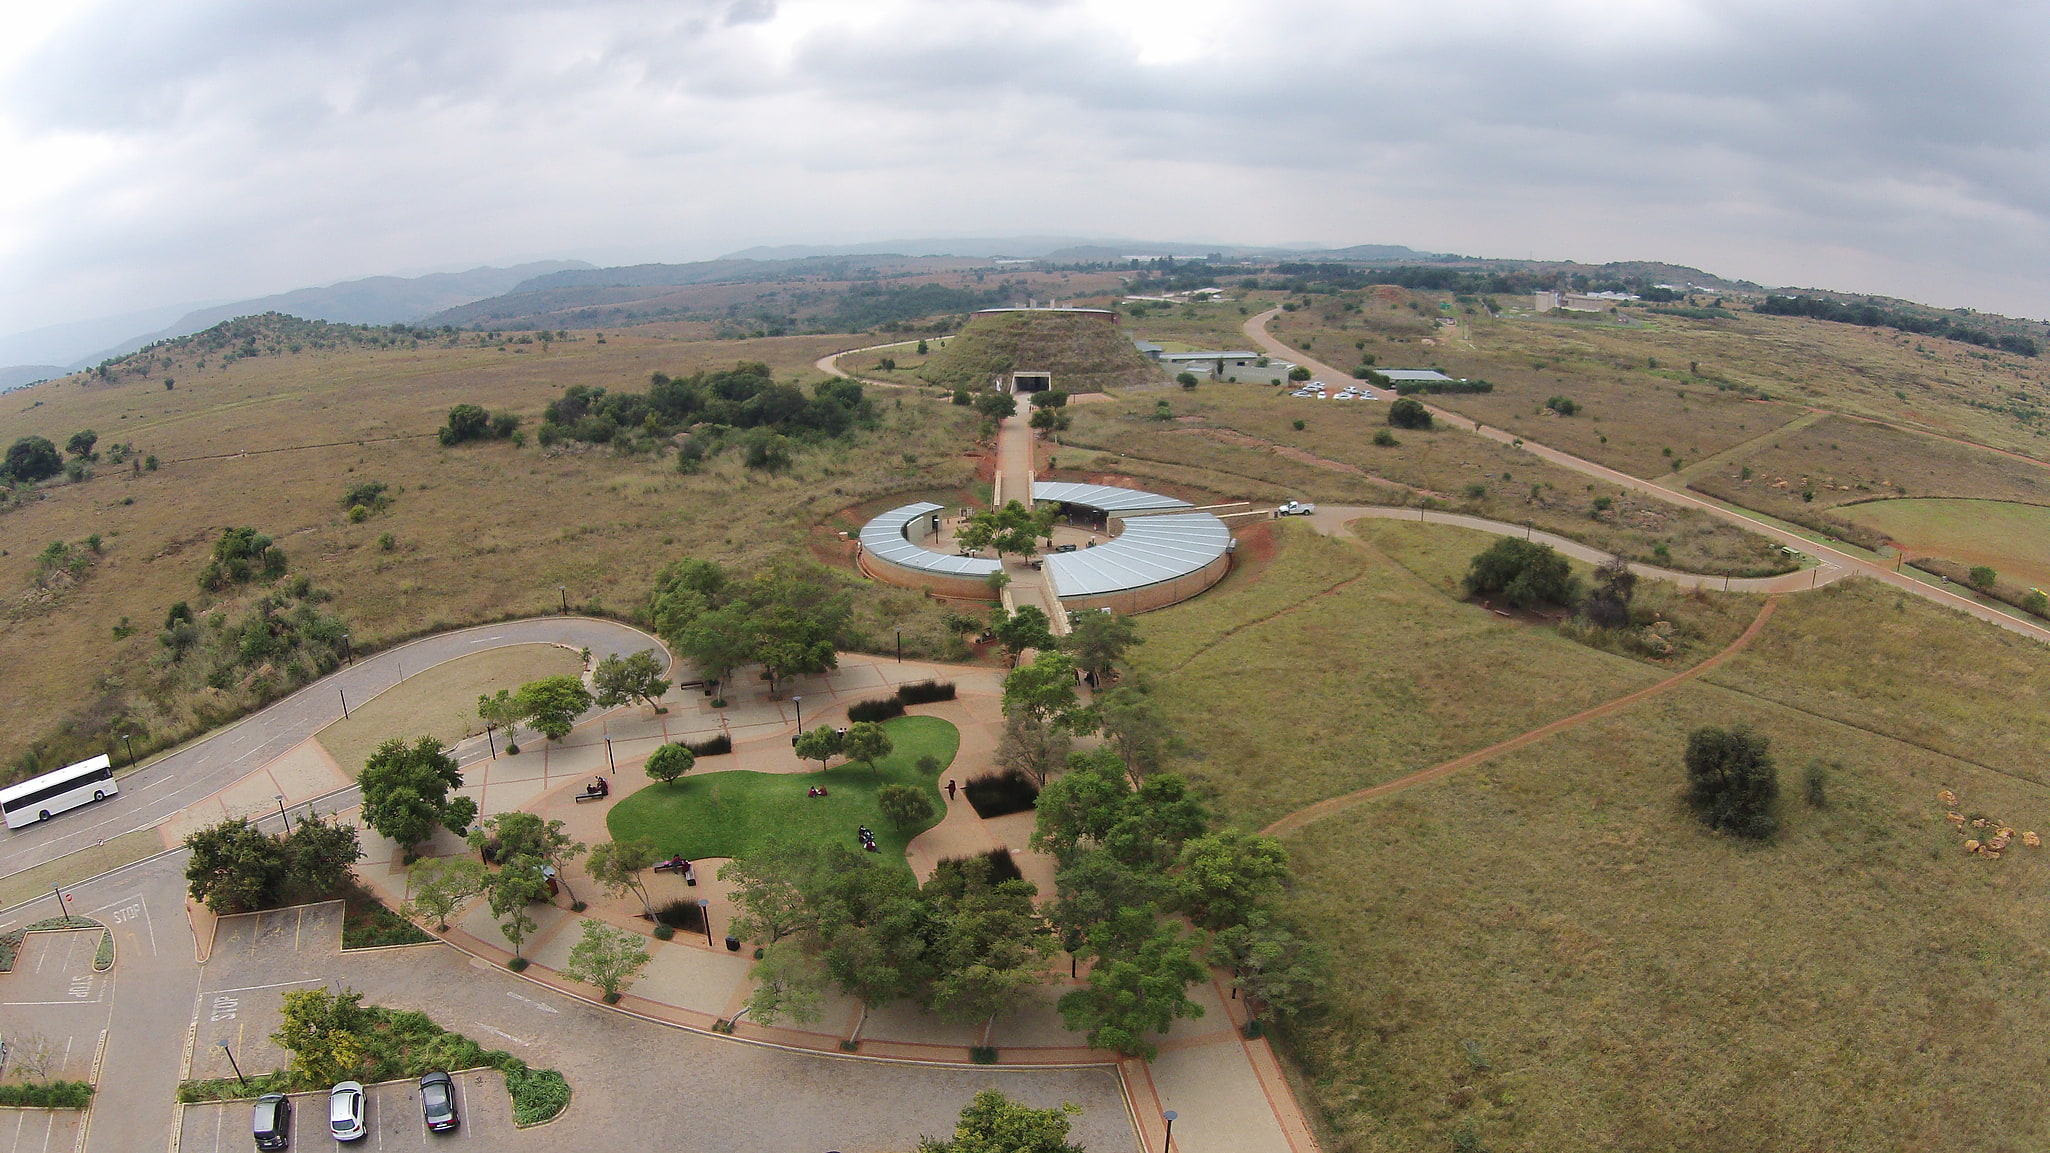 Cradle of Humankind, South Africa